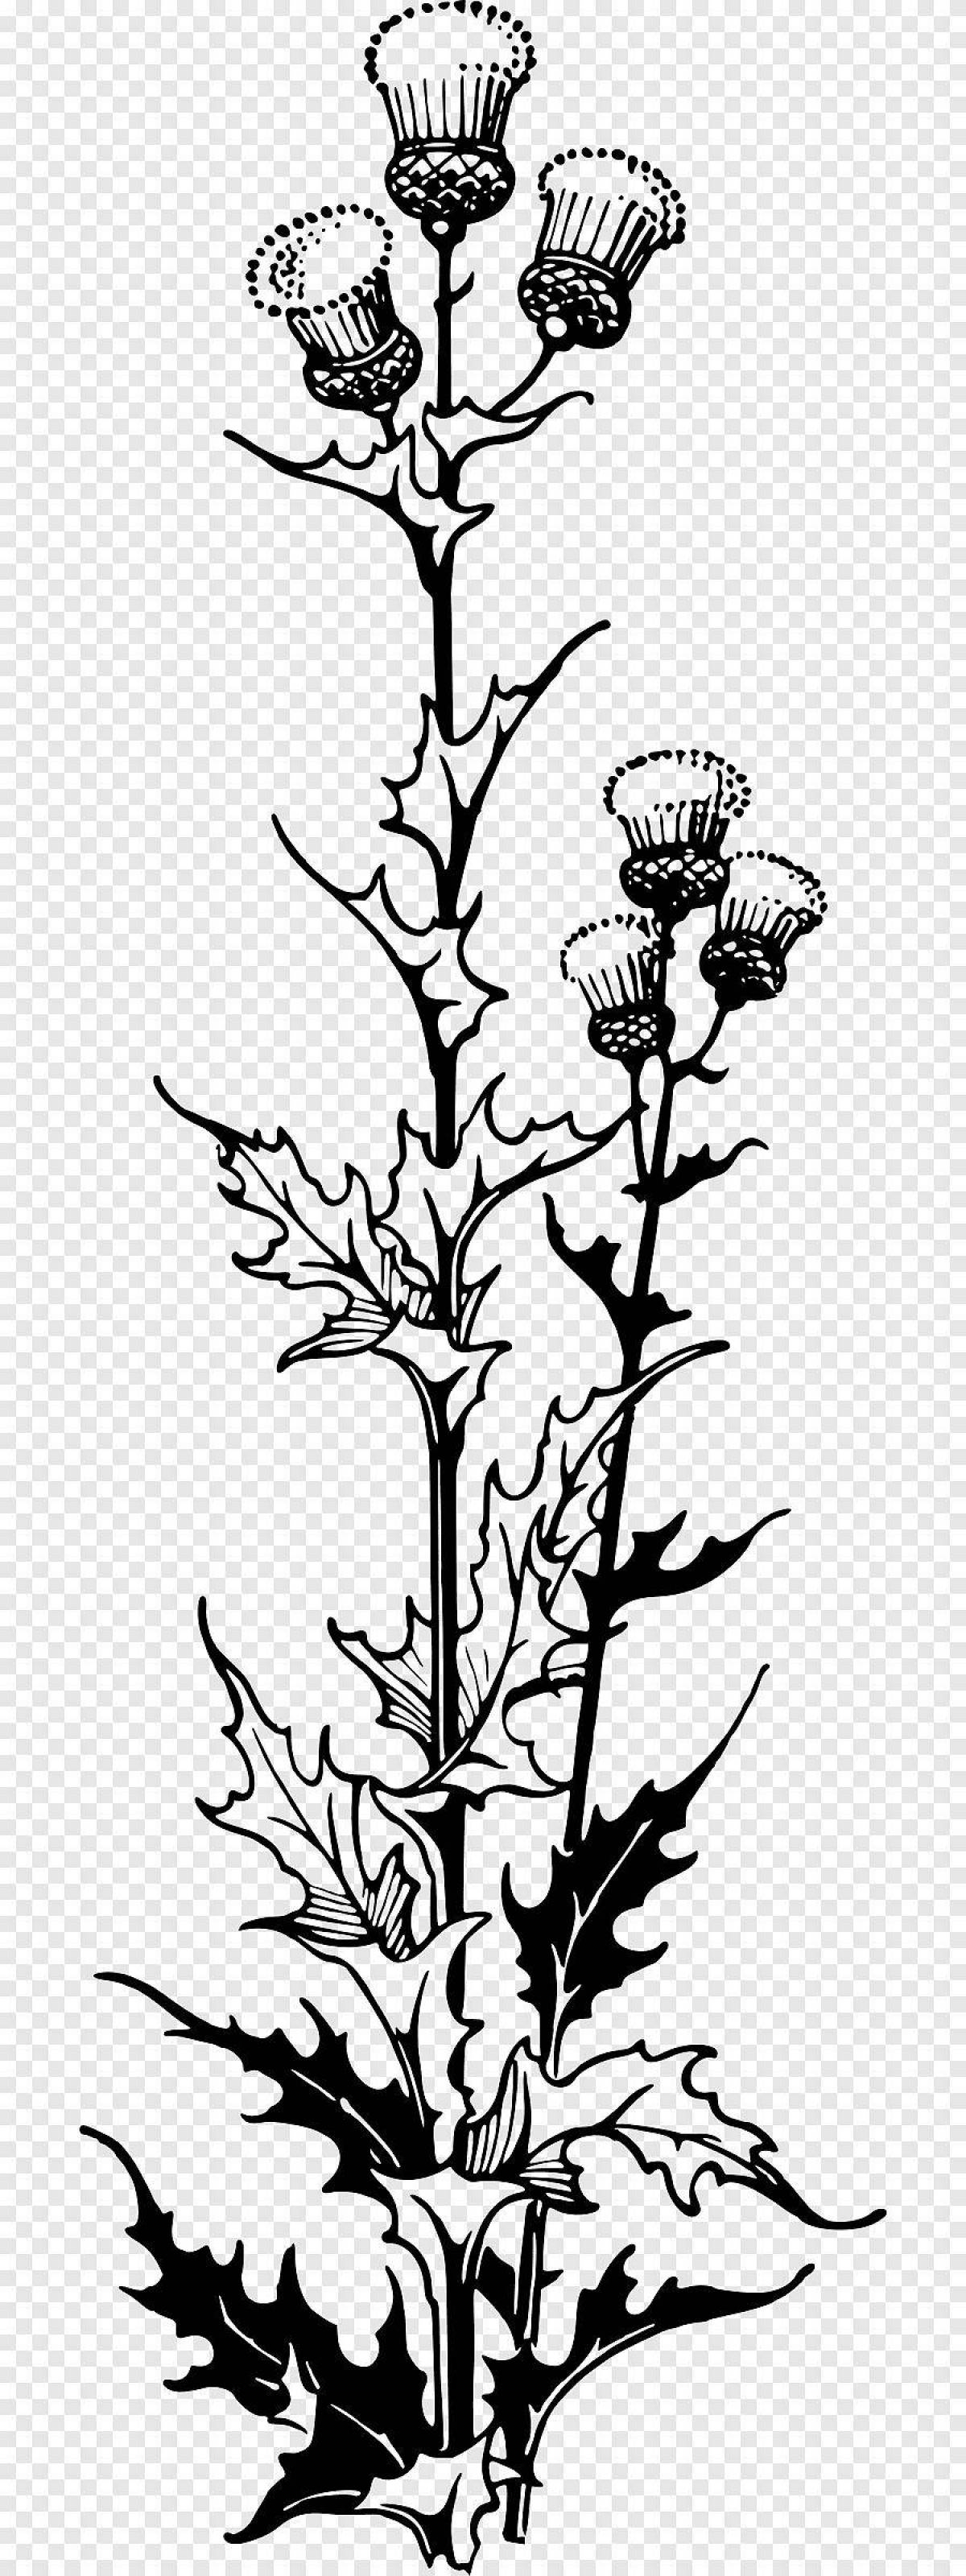 Coloring page happy thistle